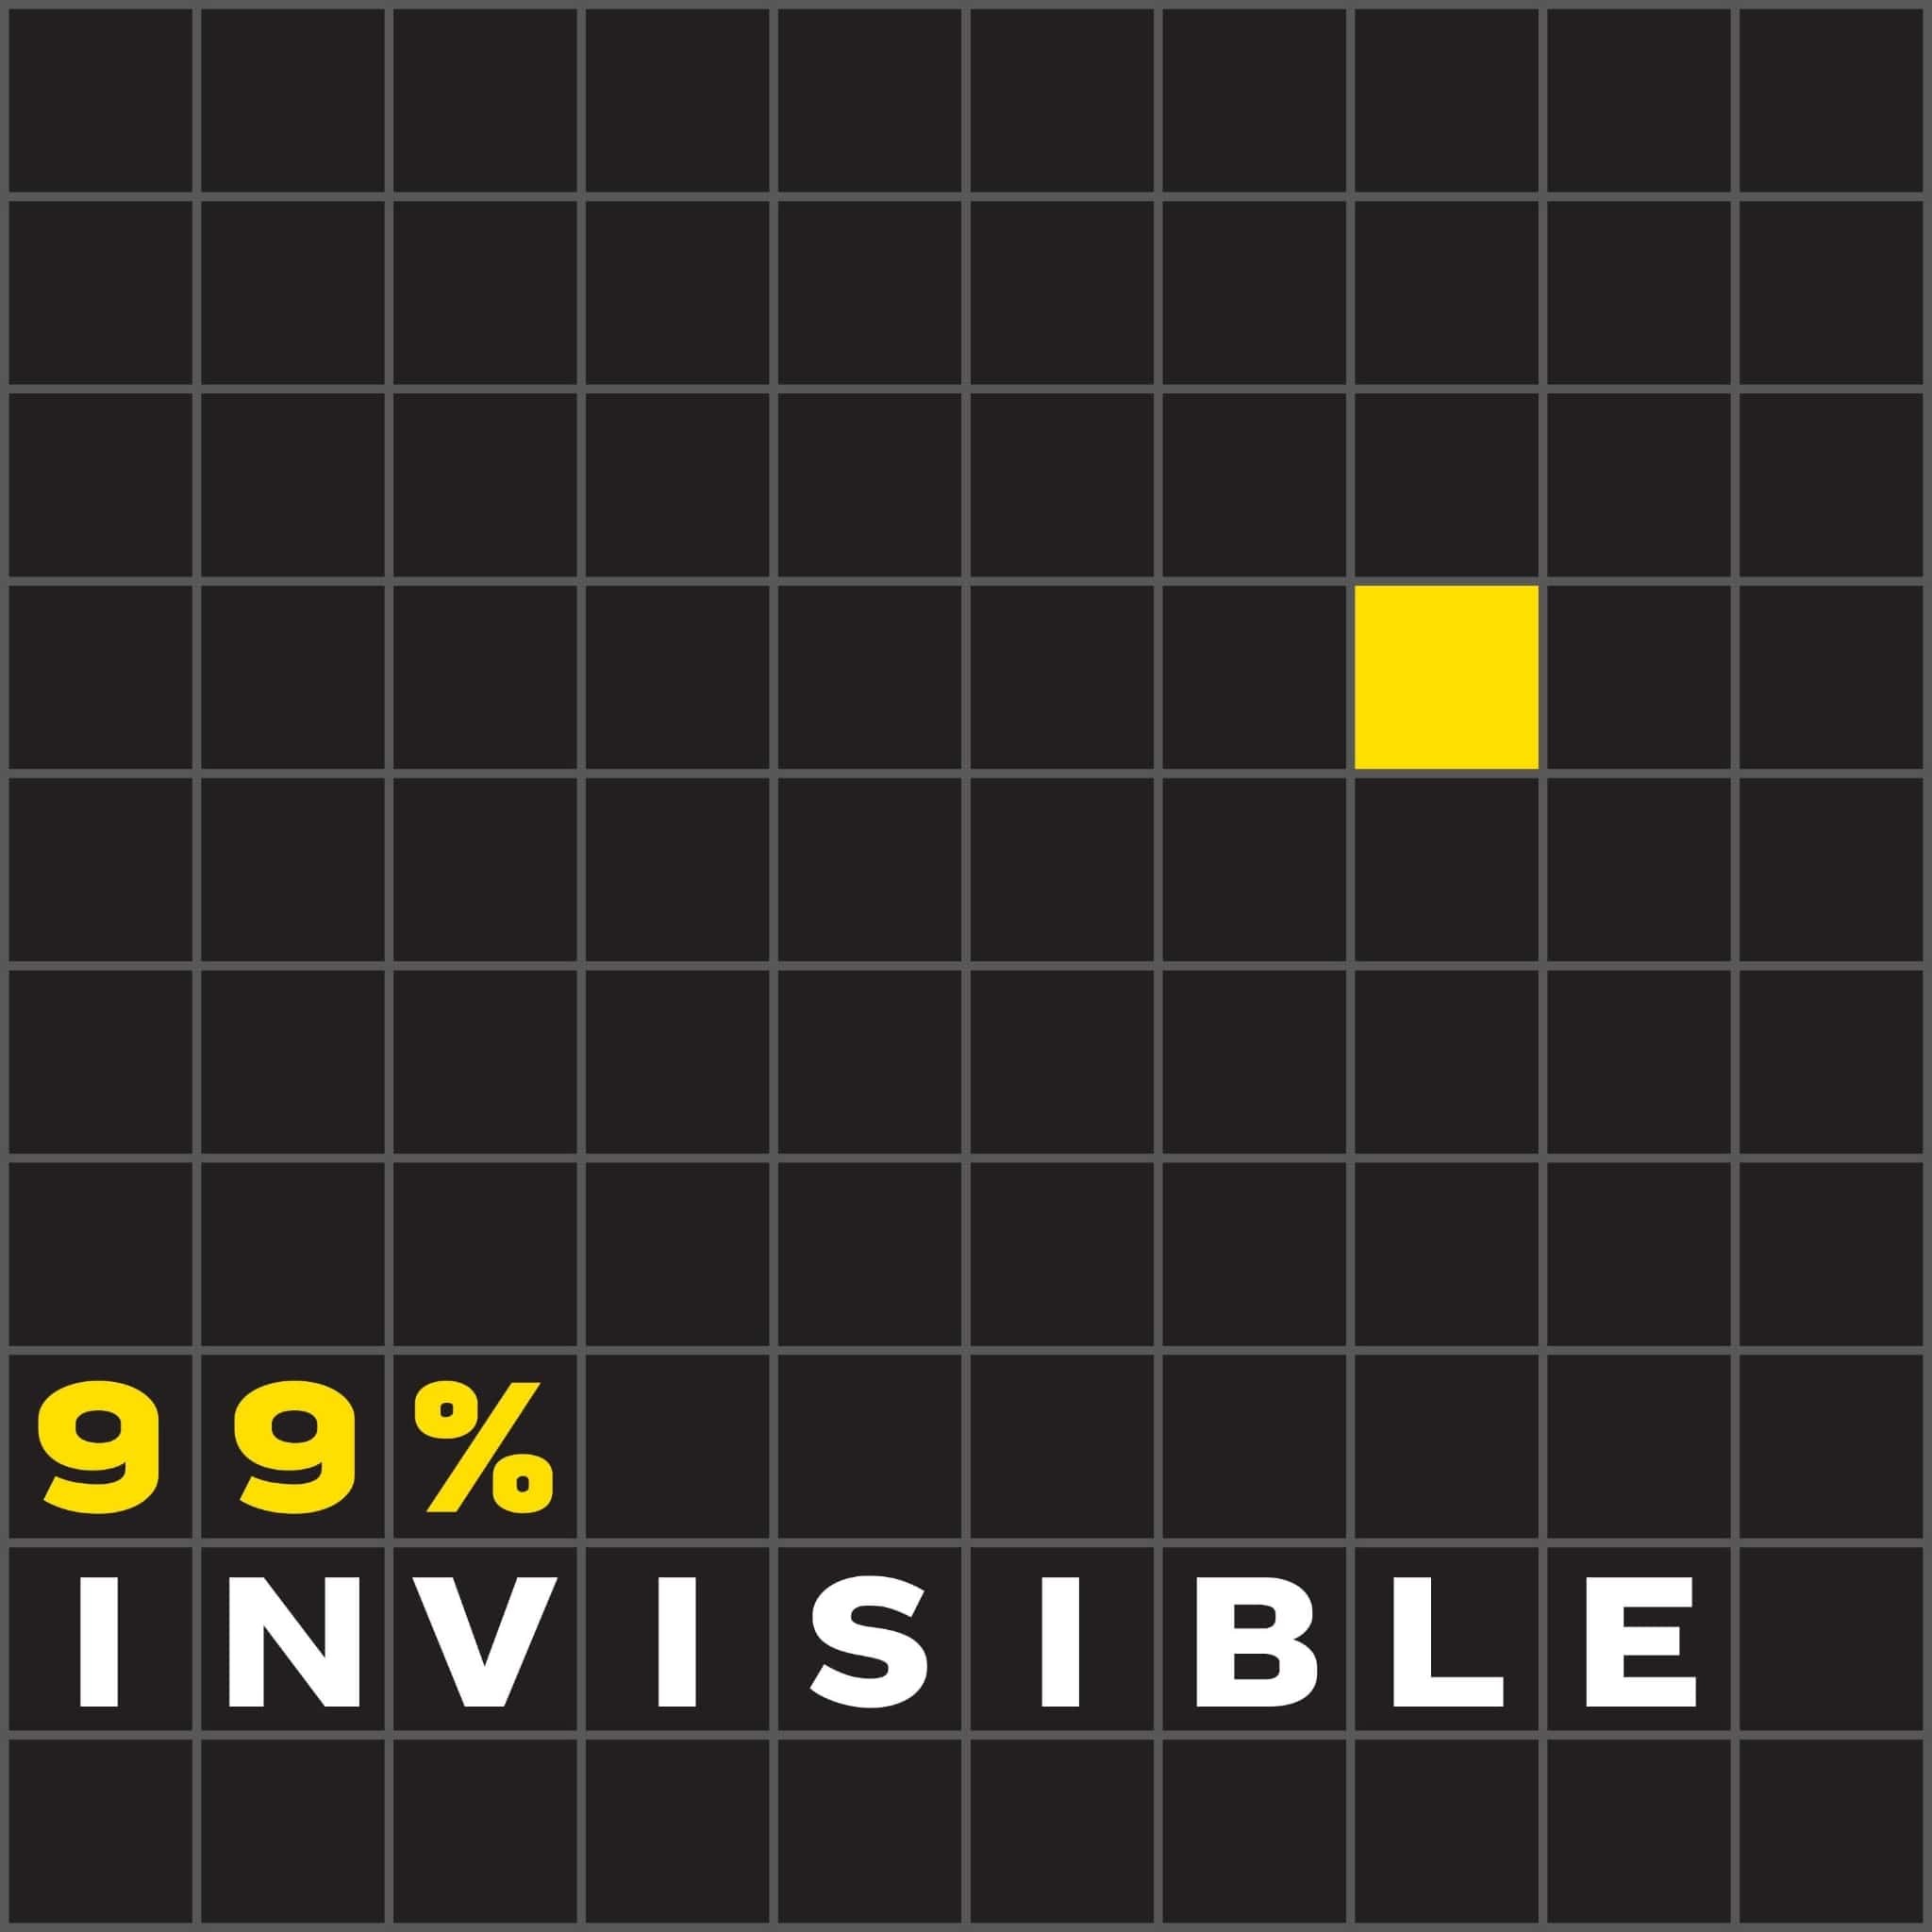 99-invisible-1628499104.jpg